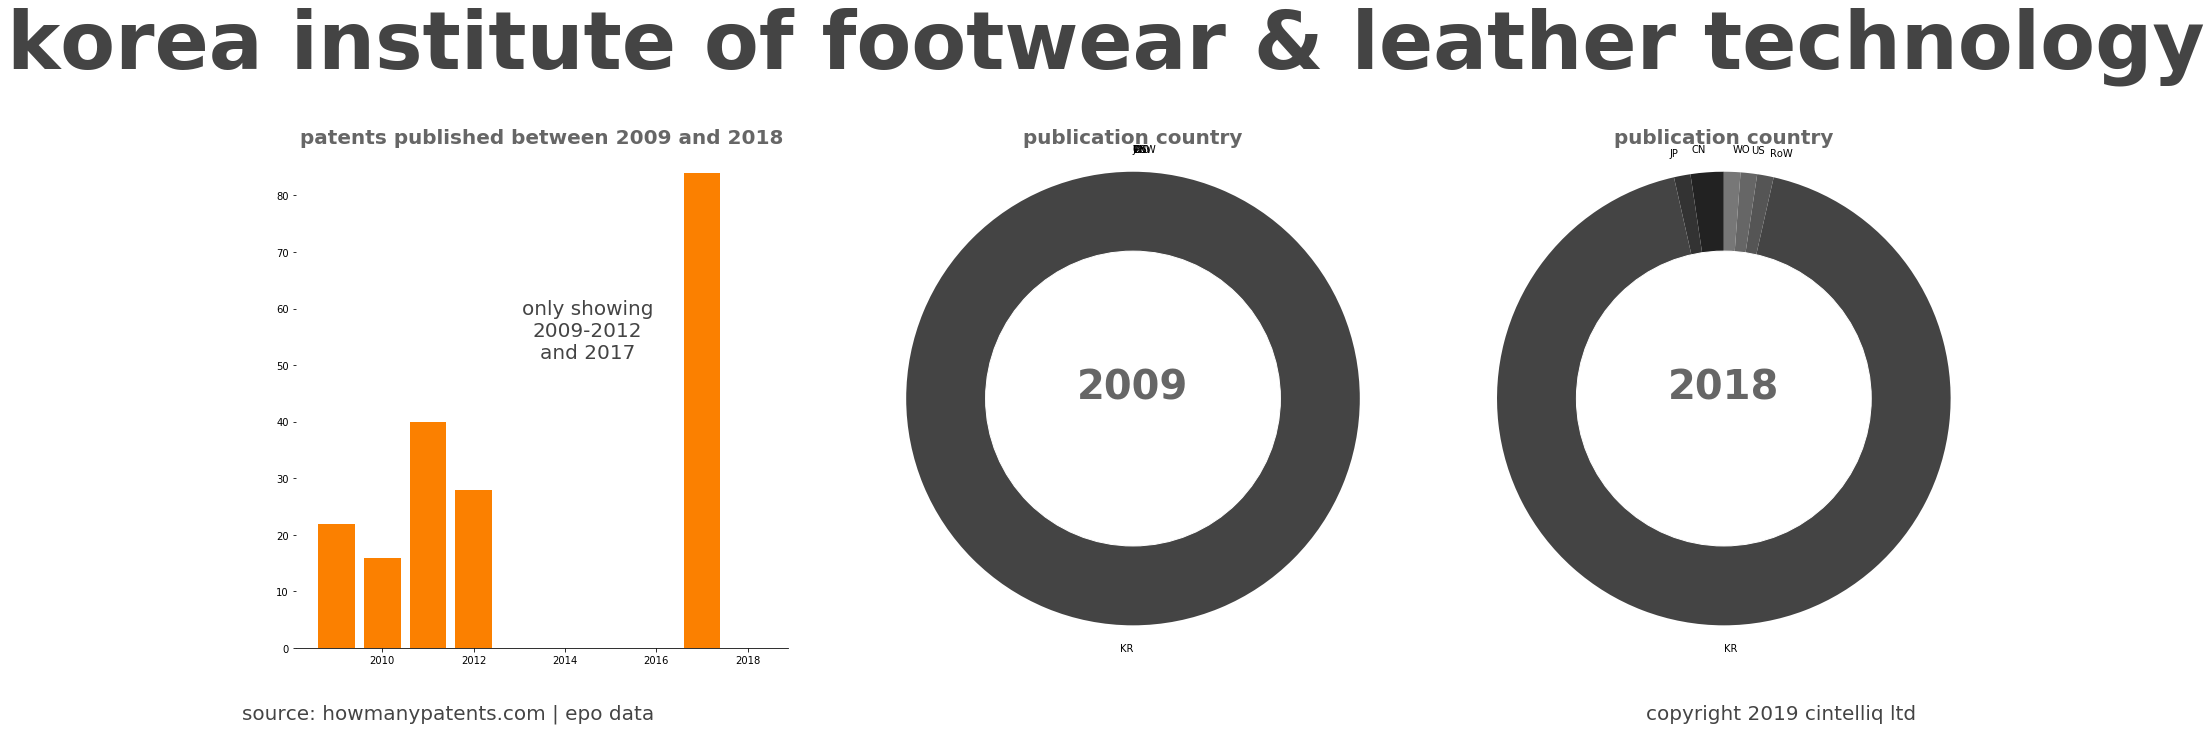 summary of patents for Korea Institute Of Footwear & Leather Technology